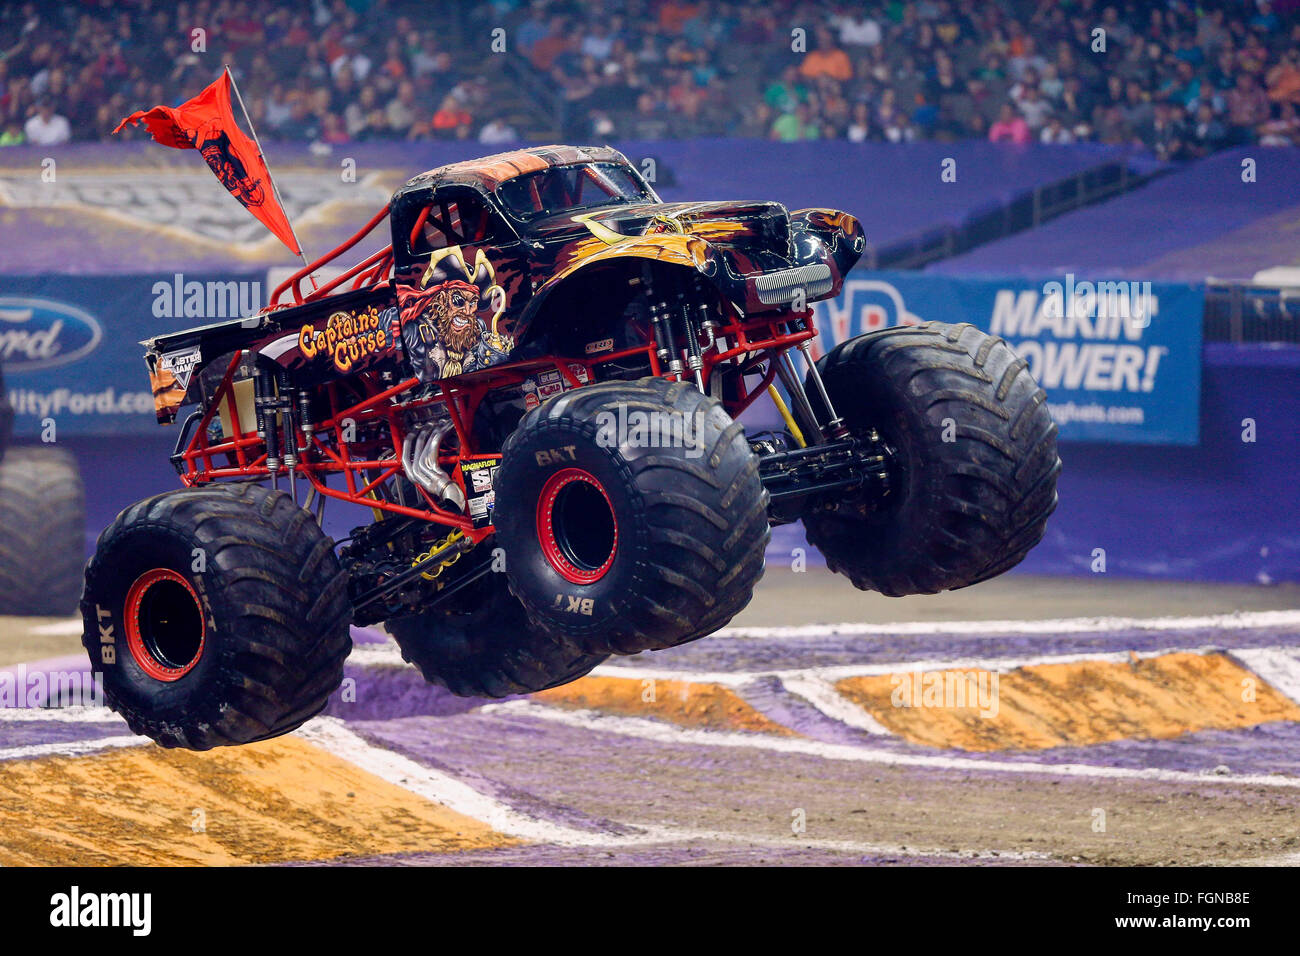 New Orleans, LA, USA. 20th Feb, 2016. Captains Curse monster truck in  action during Monster Jam at the Mercedes-Benz Superdome in New Orleans,  LA. Stephen Lew/CSM/Alamy Live News Stock Photo - Alamy